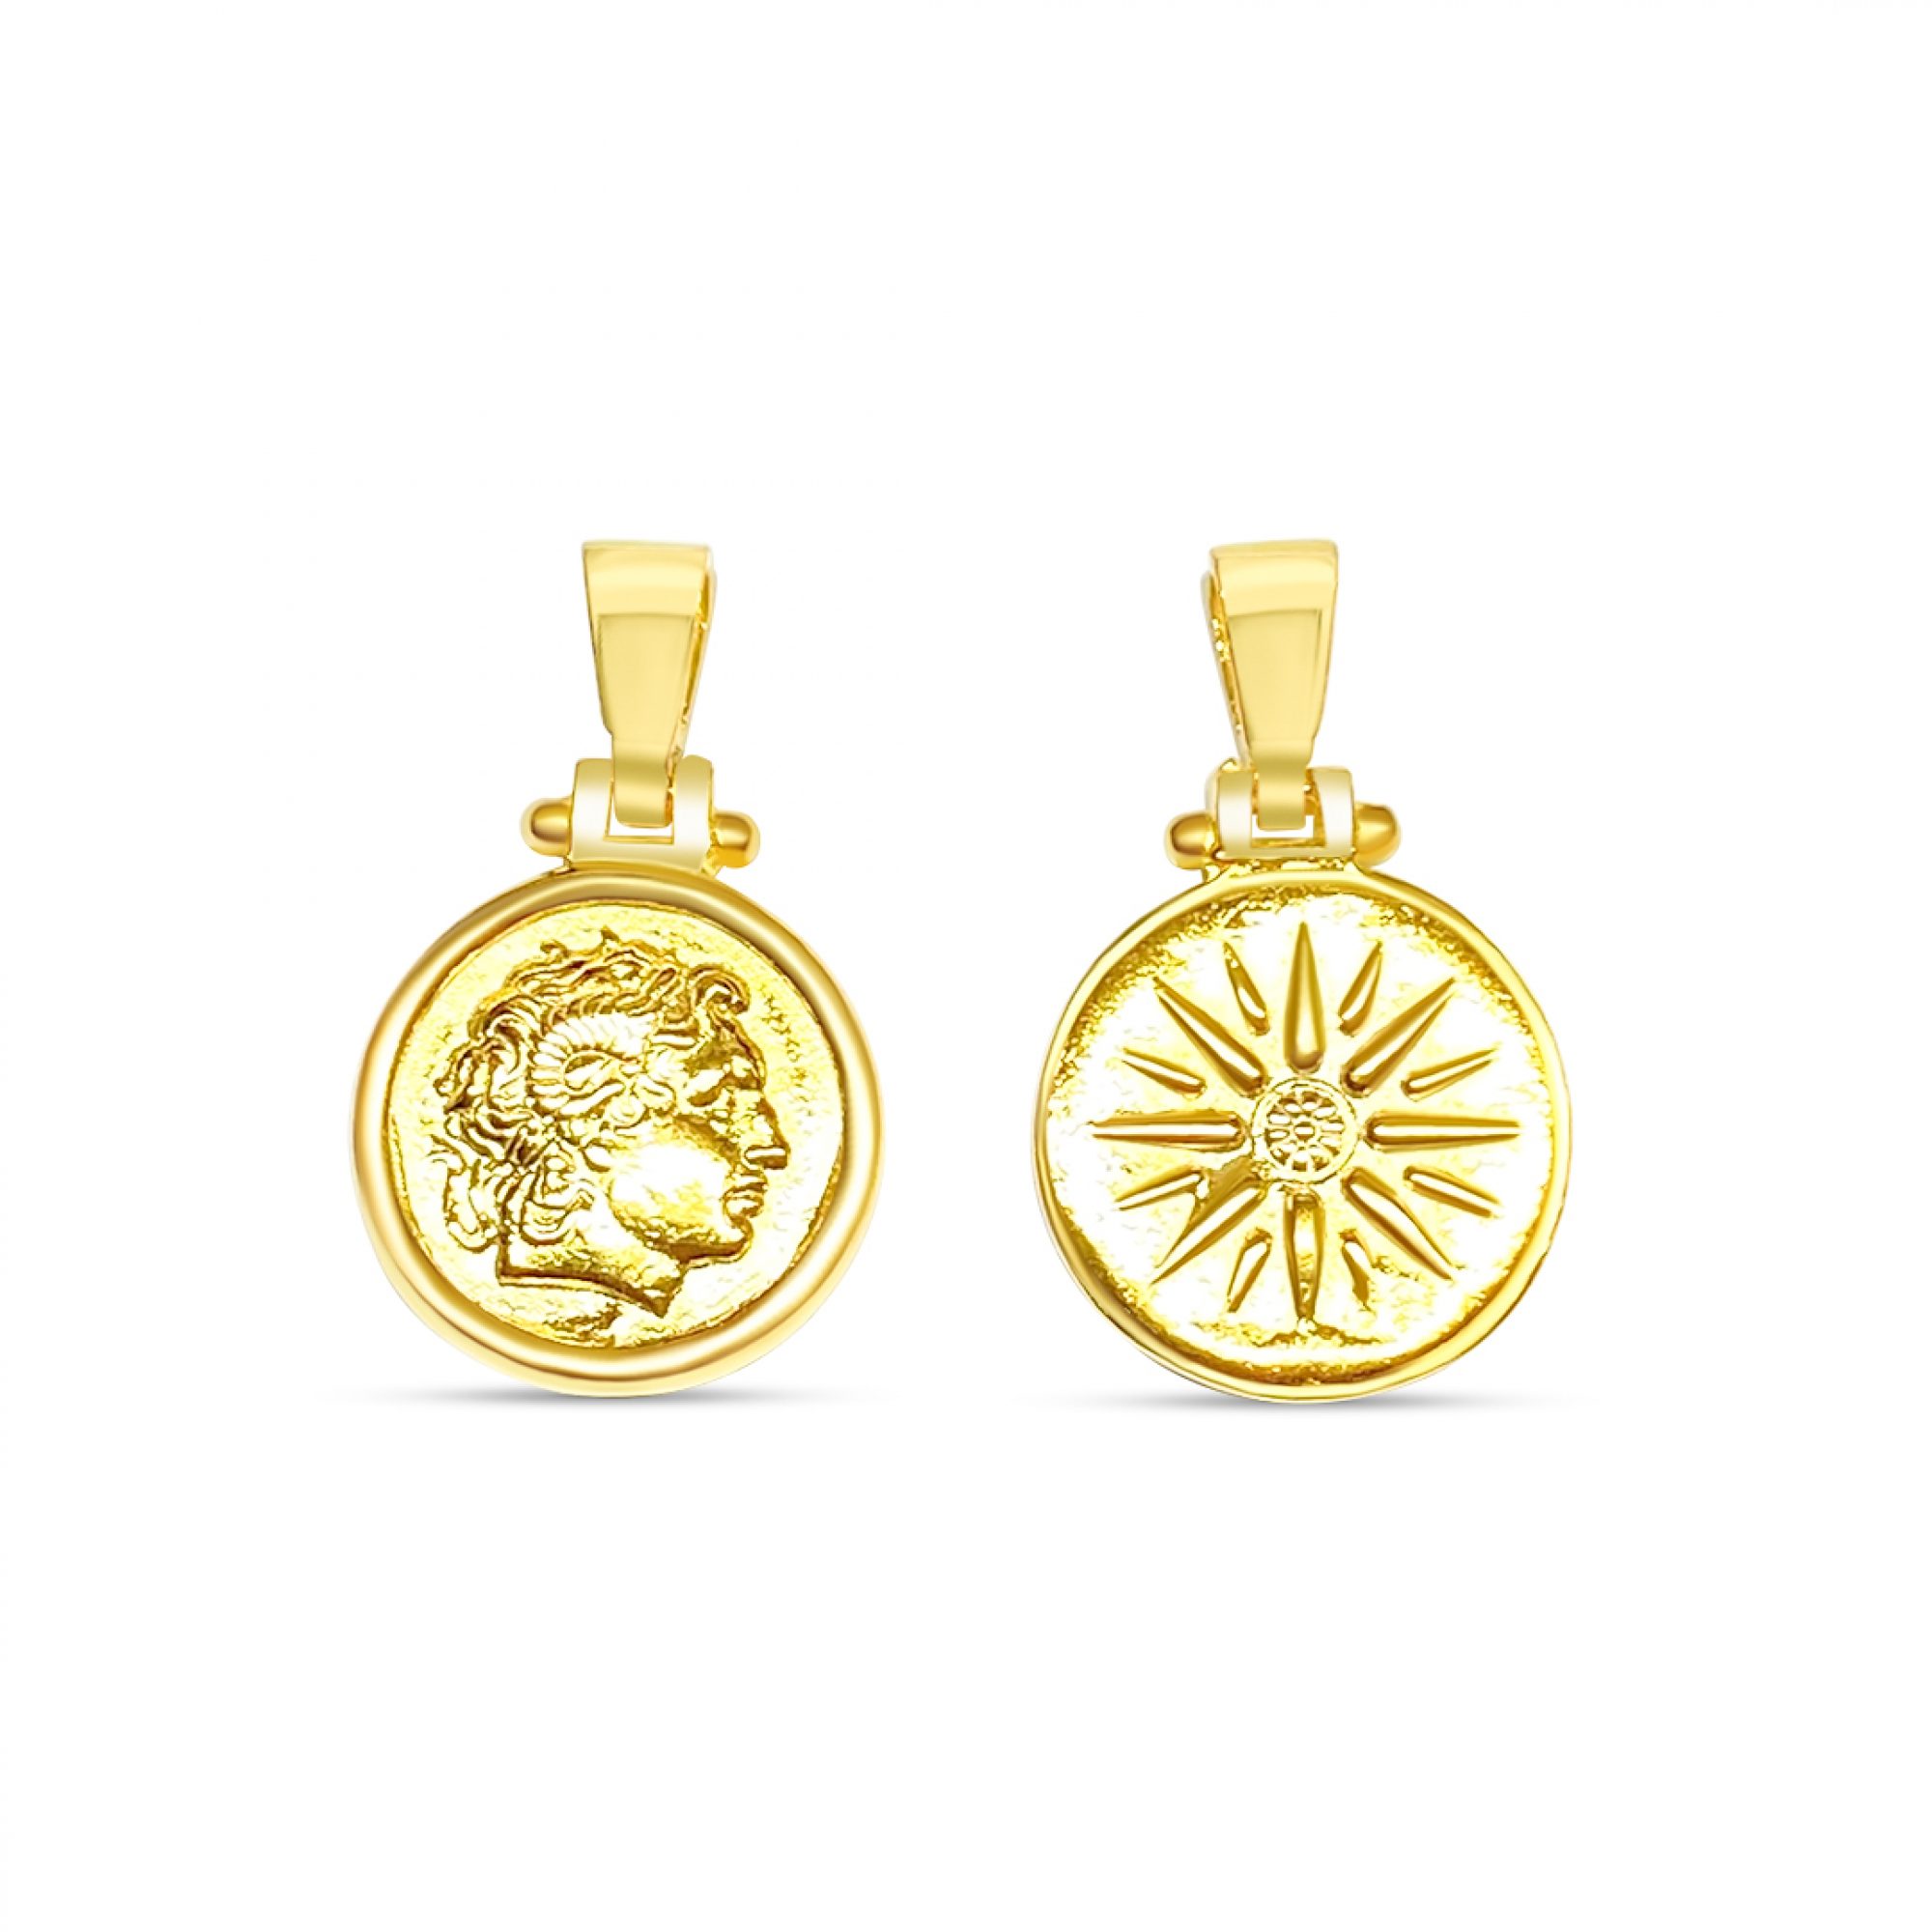 Double sided Vergina star-Alexander the Great gold plated pendant